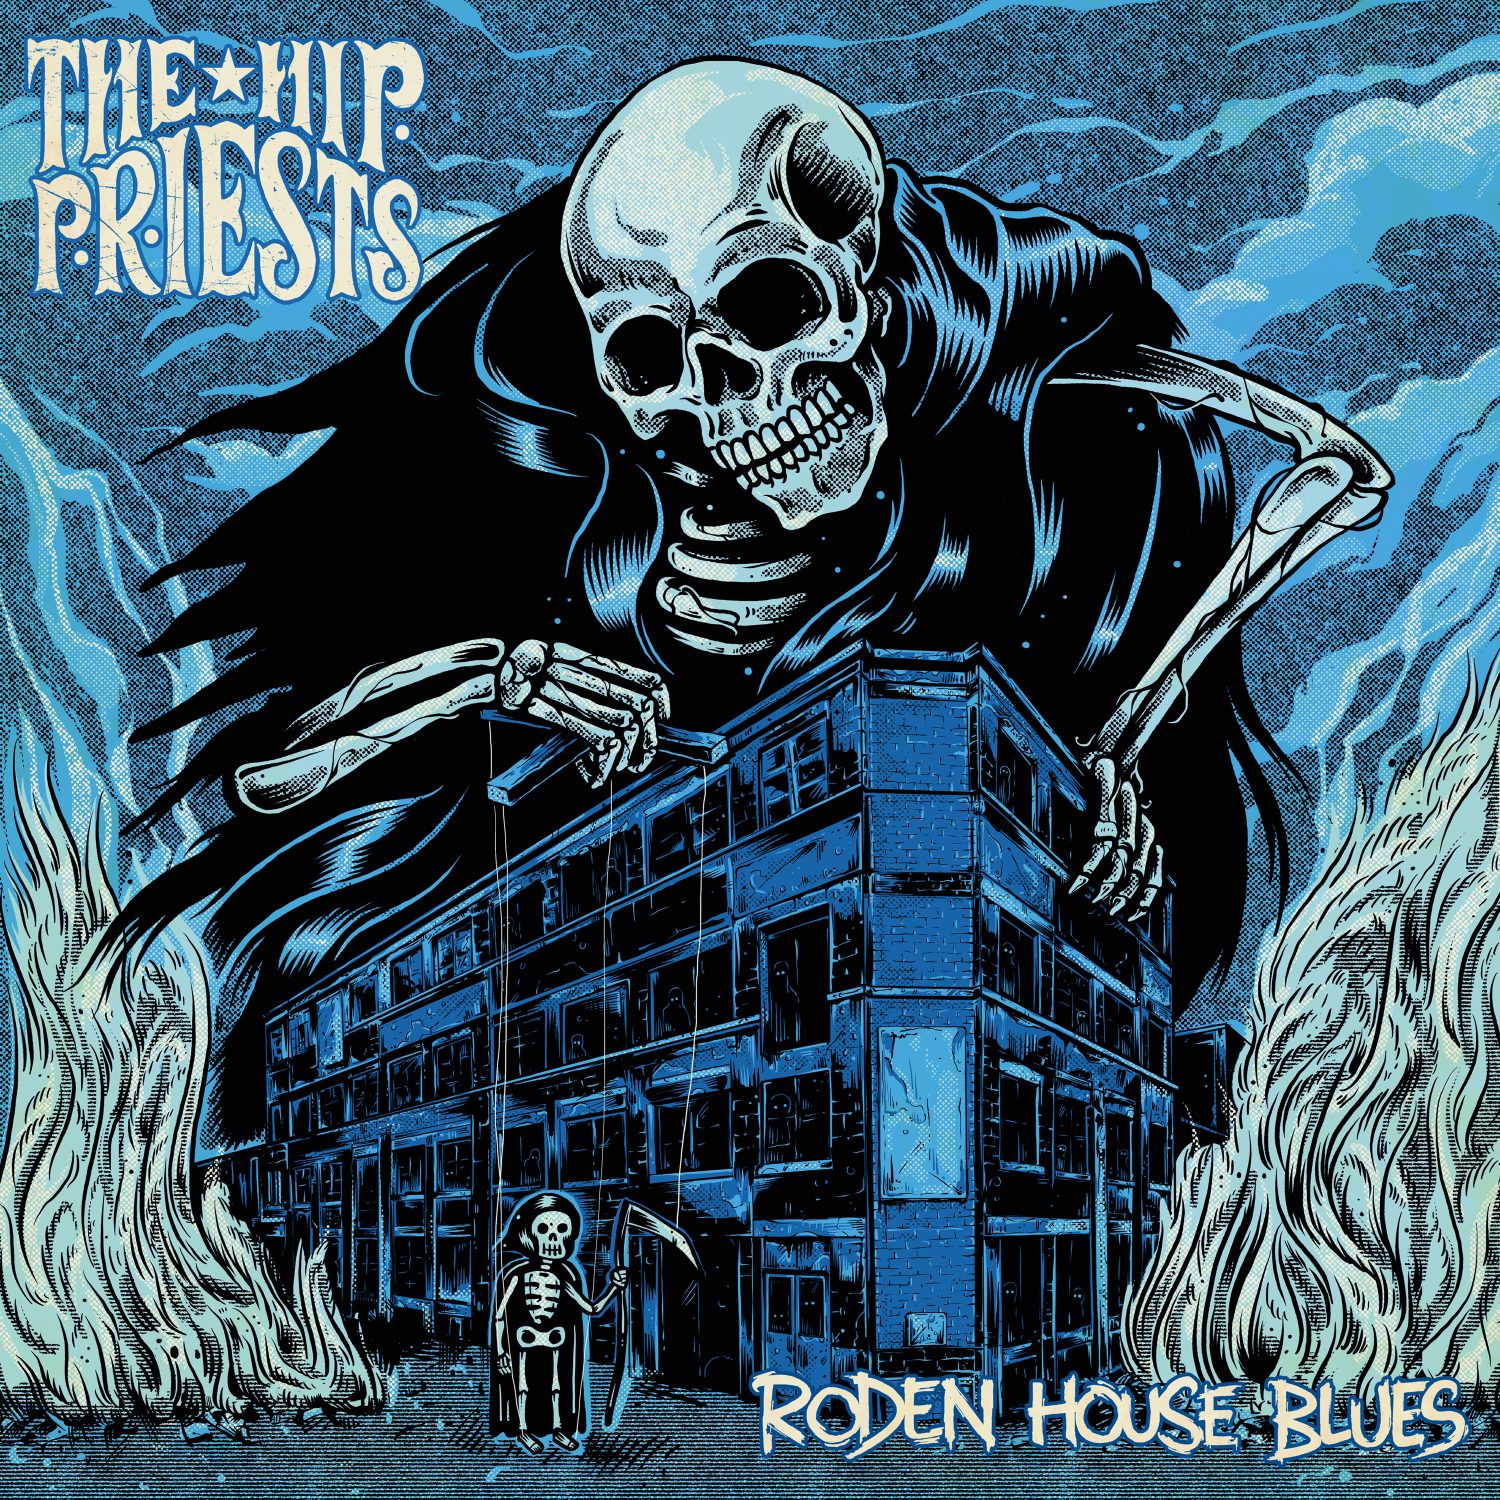 ALBUM REVIEW: Roden House Blues by The Hip Priests